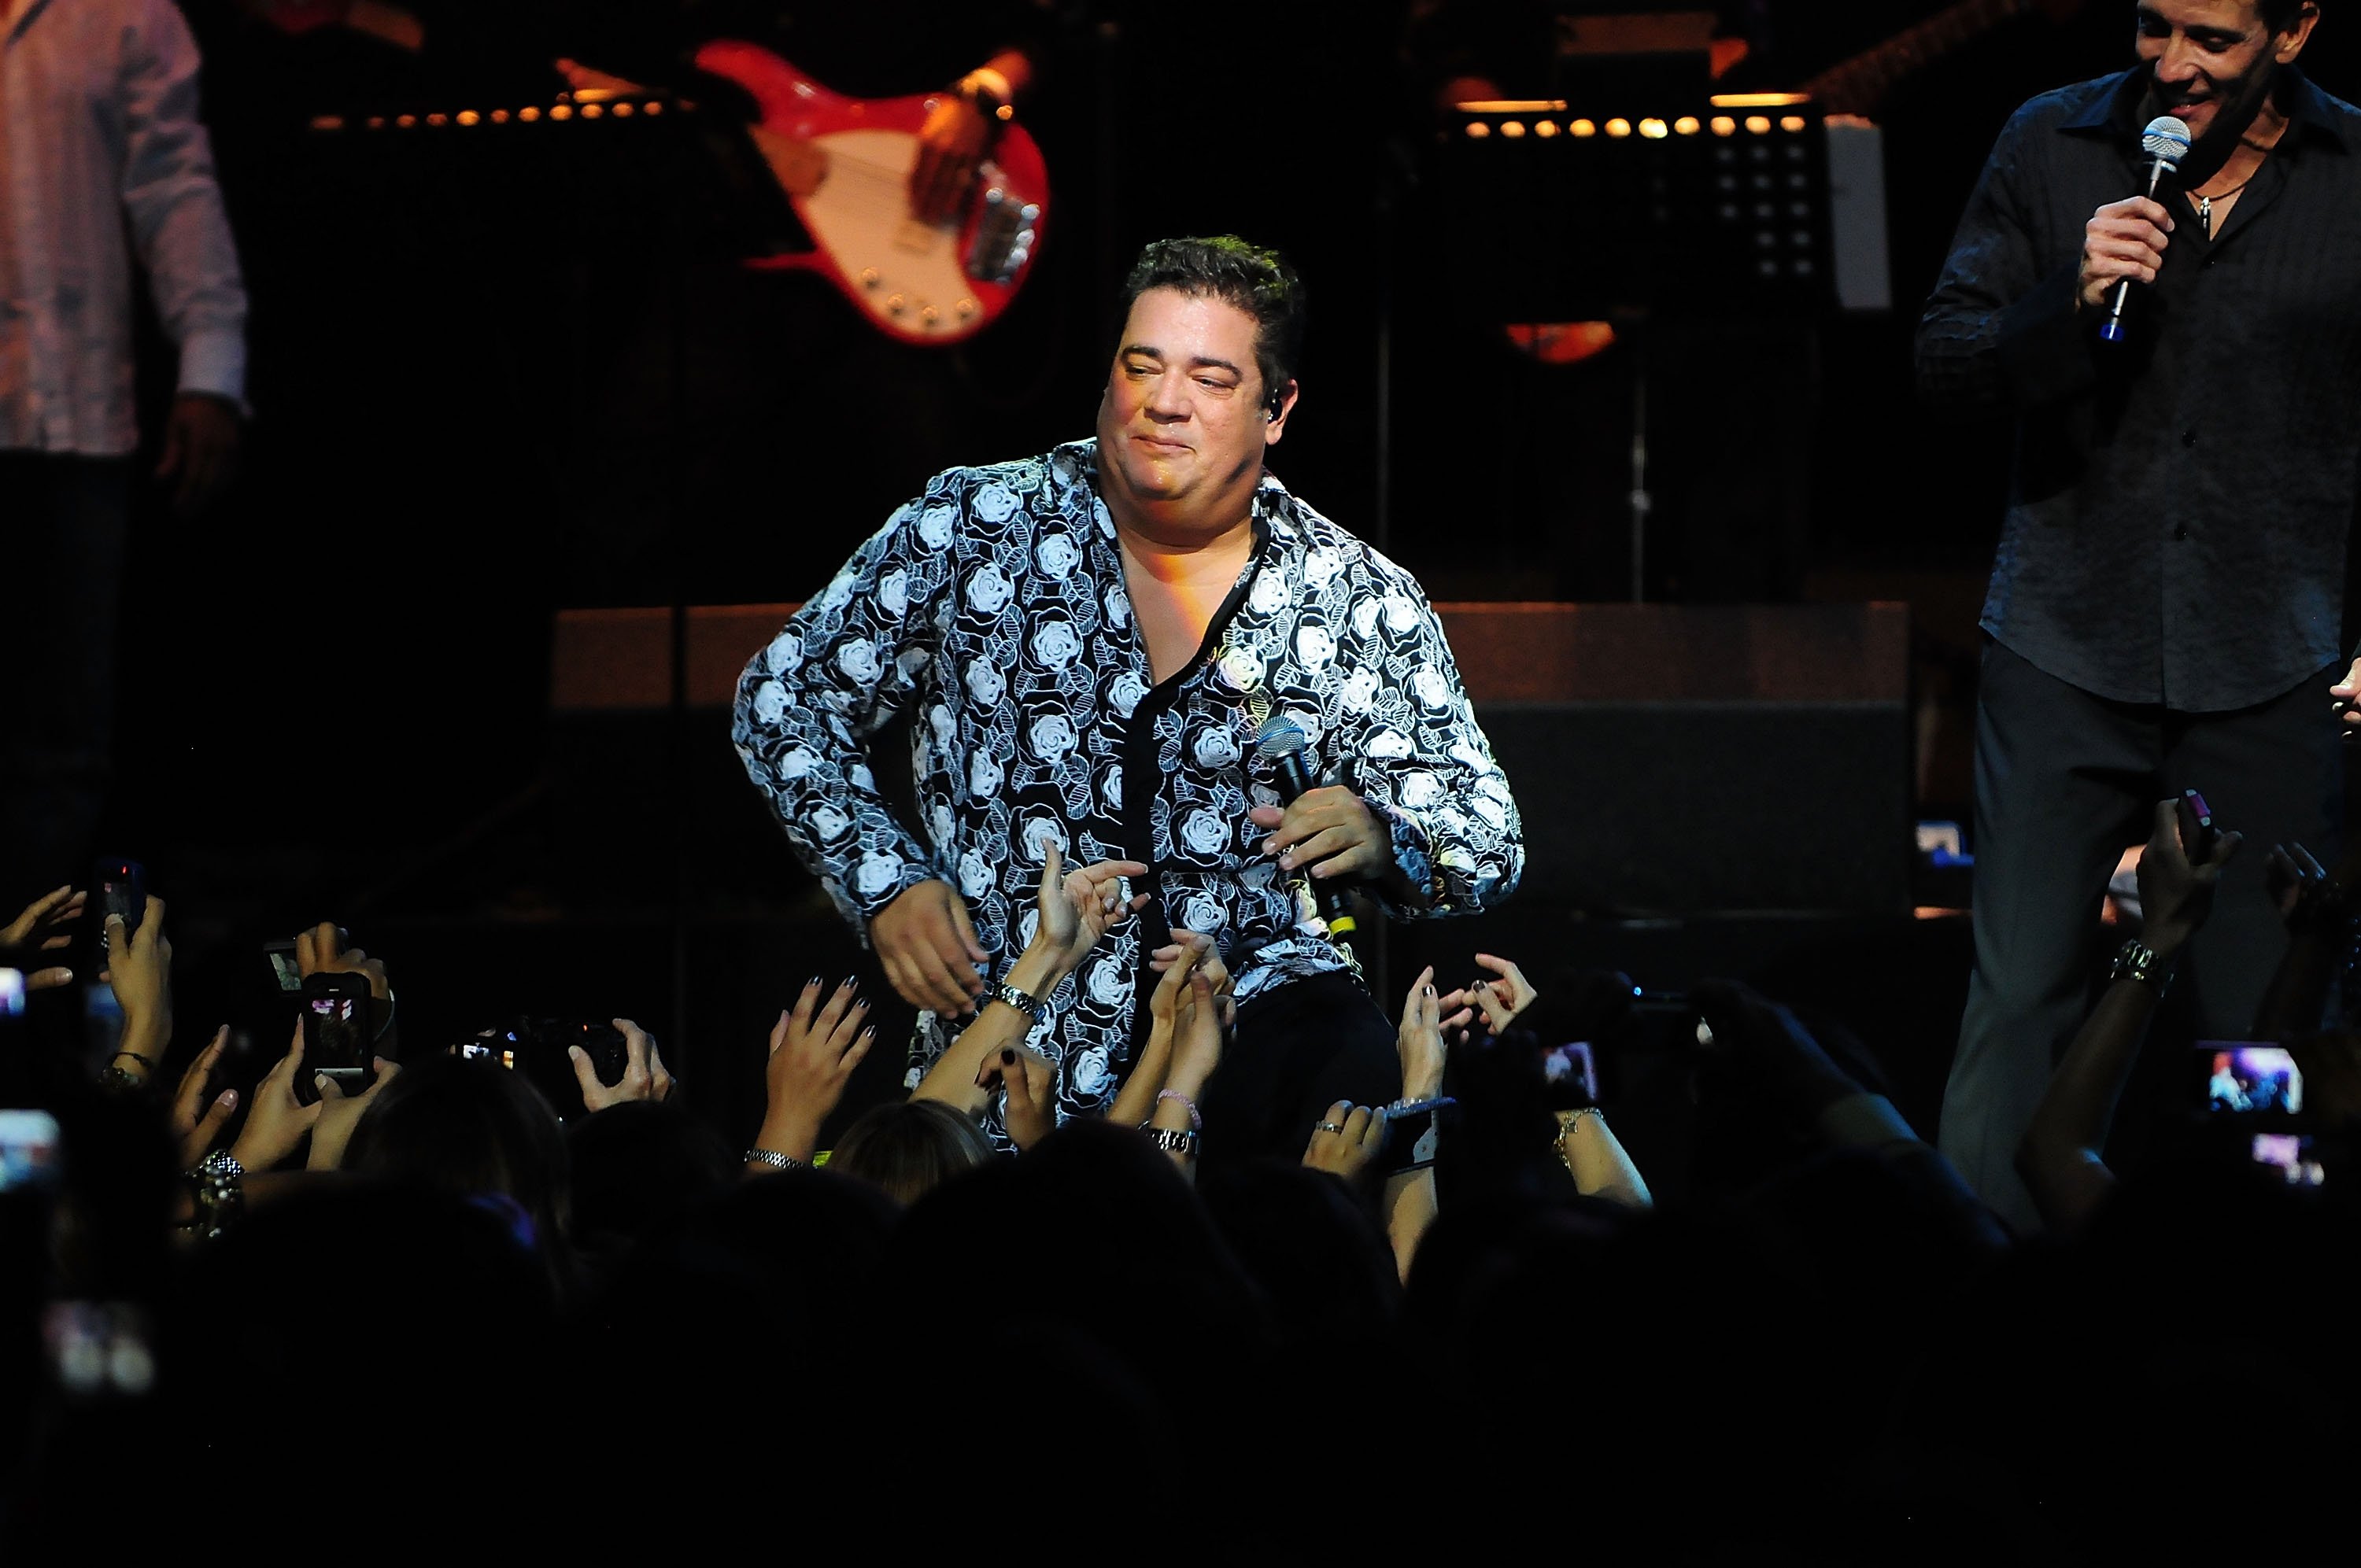 Ray Reyes performs at James L Knight Center on July 23, 2011 in Miami, Florida | Photo: Getty Images